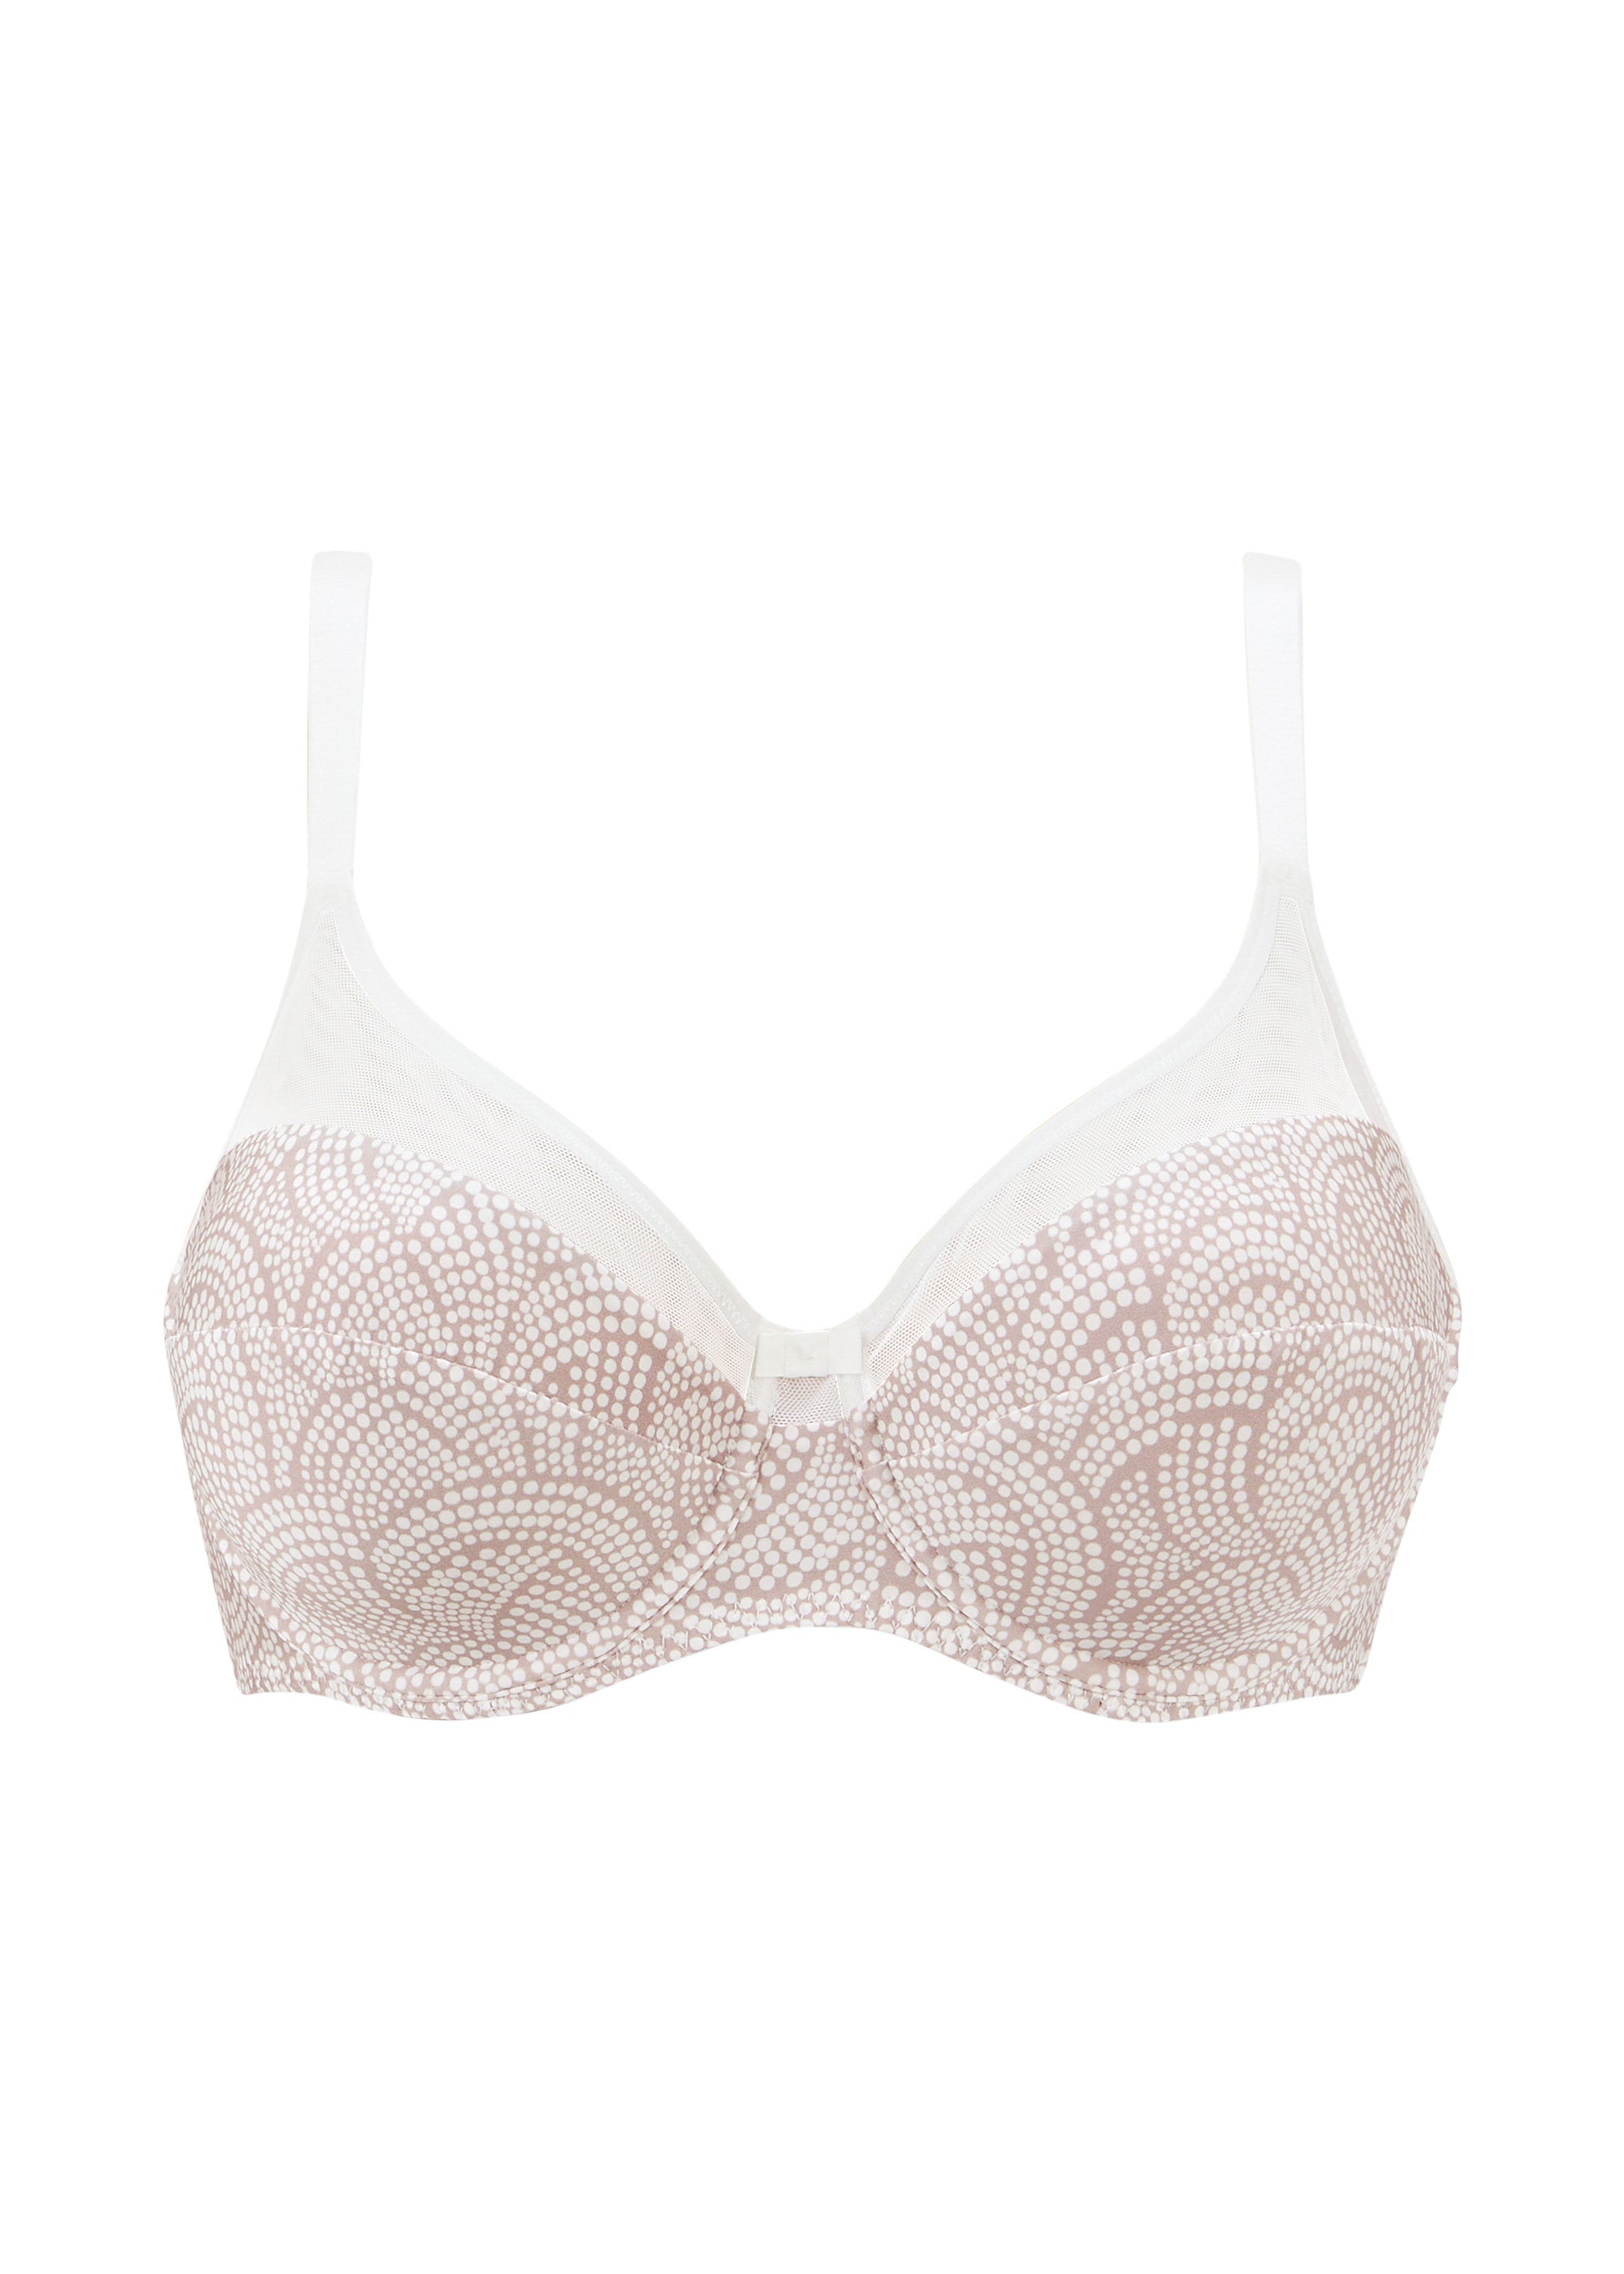 Full Cup Bra Complice Taupe Graphic Print